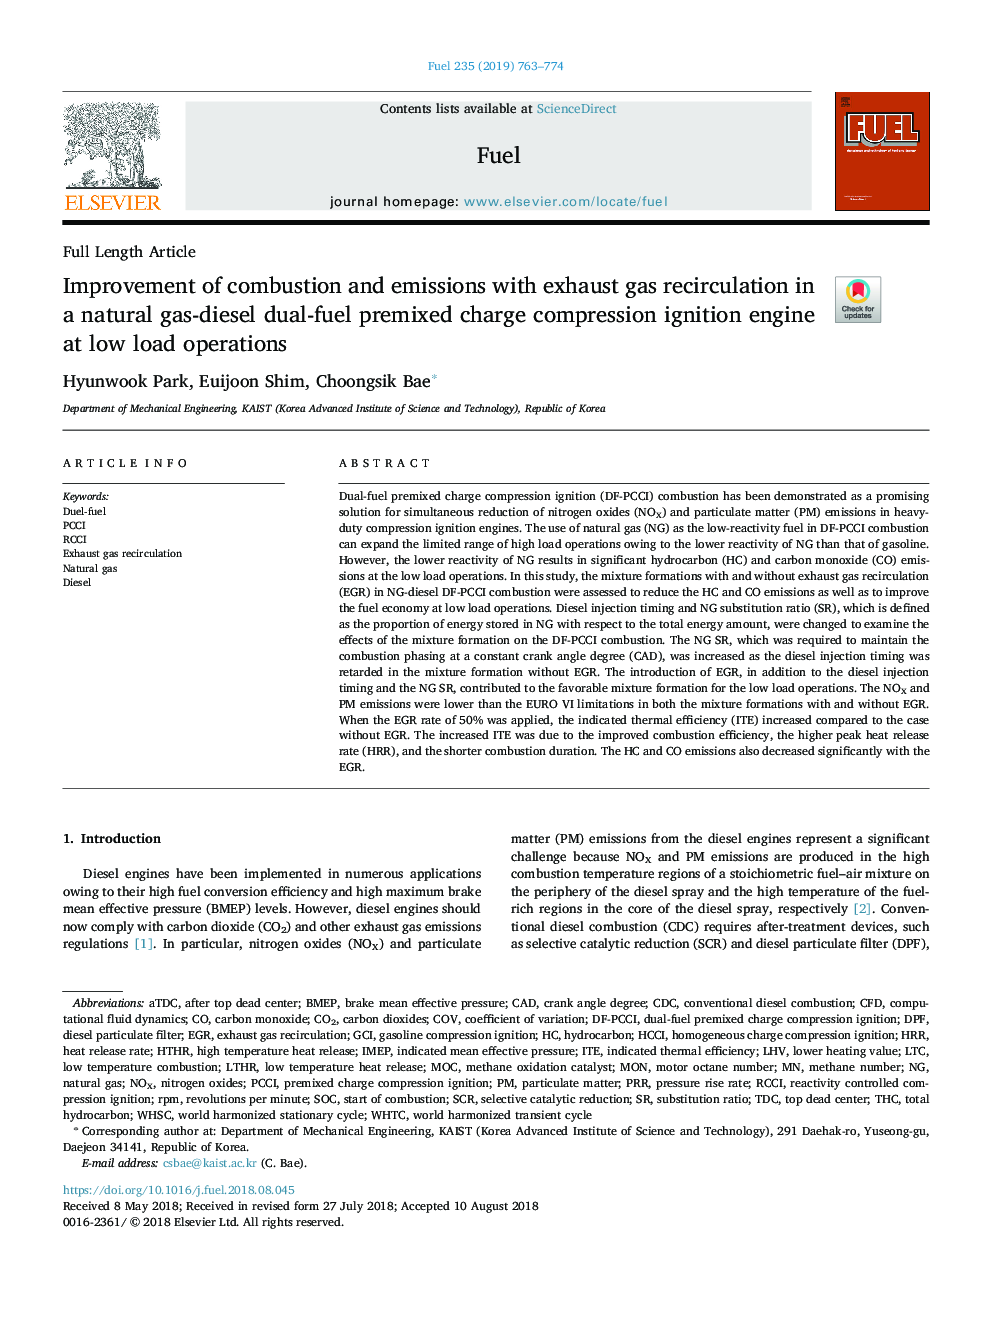 Improvement of combustion and emissions with exhaust gas recirculation in a natural gas-diesel dual-fuel premixed charge compression ignition engine at low load operations